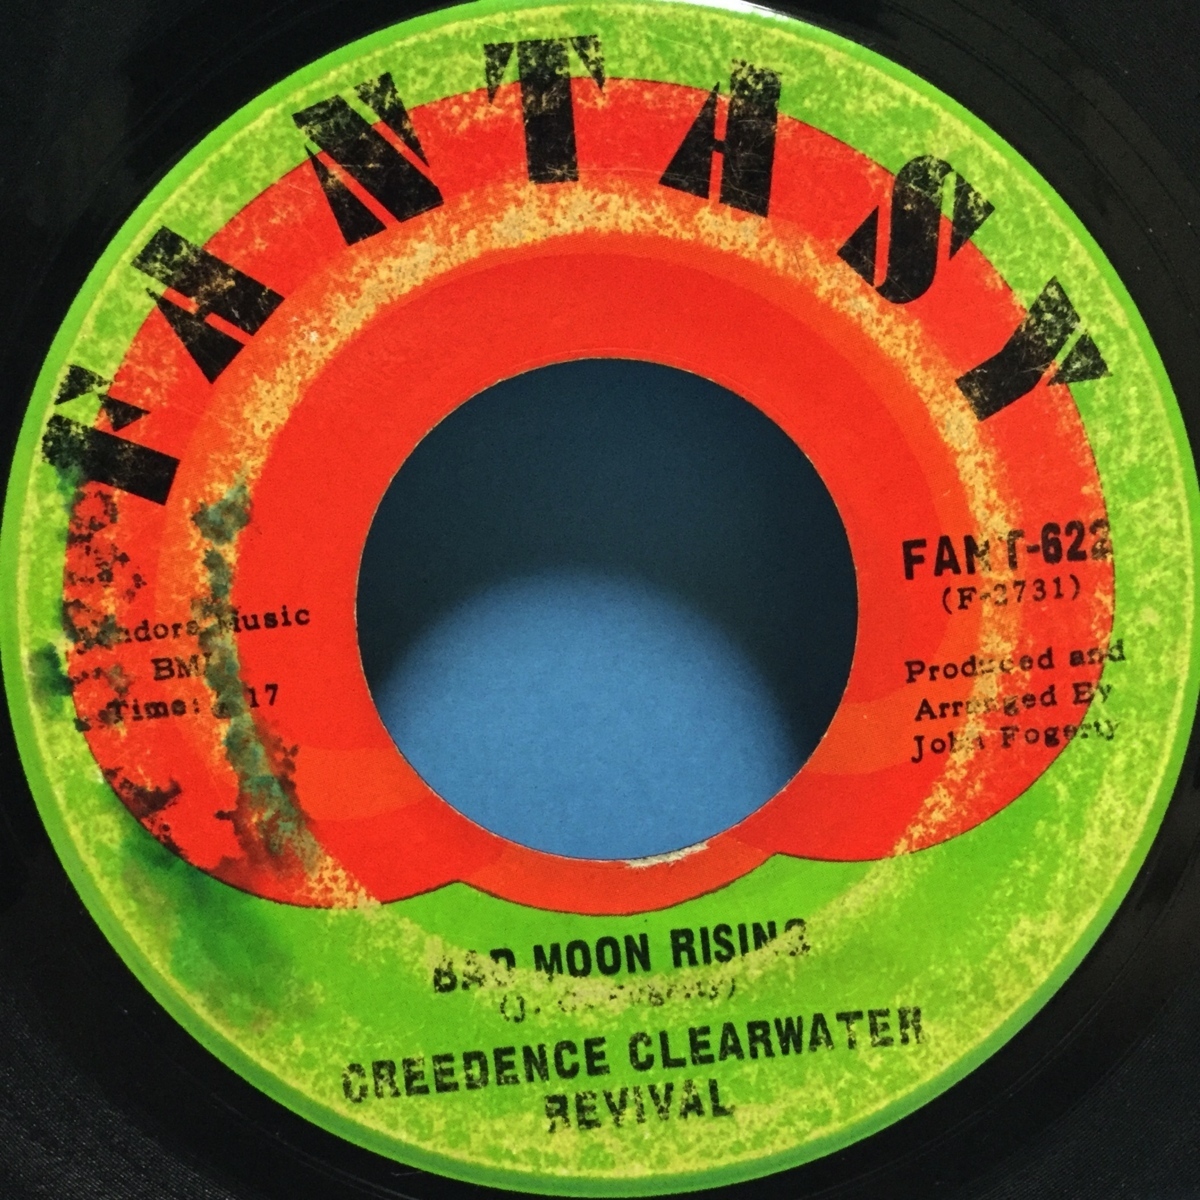 EP 洋楽 Creedence Clearwater Revival / Bad Moon Rising 米盤_画像3